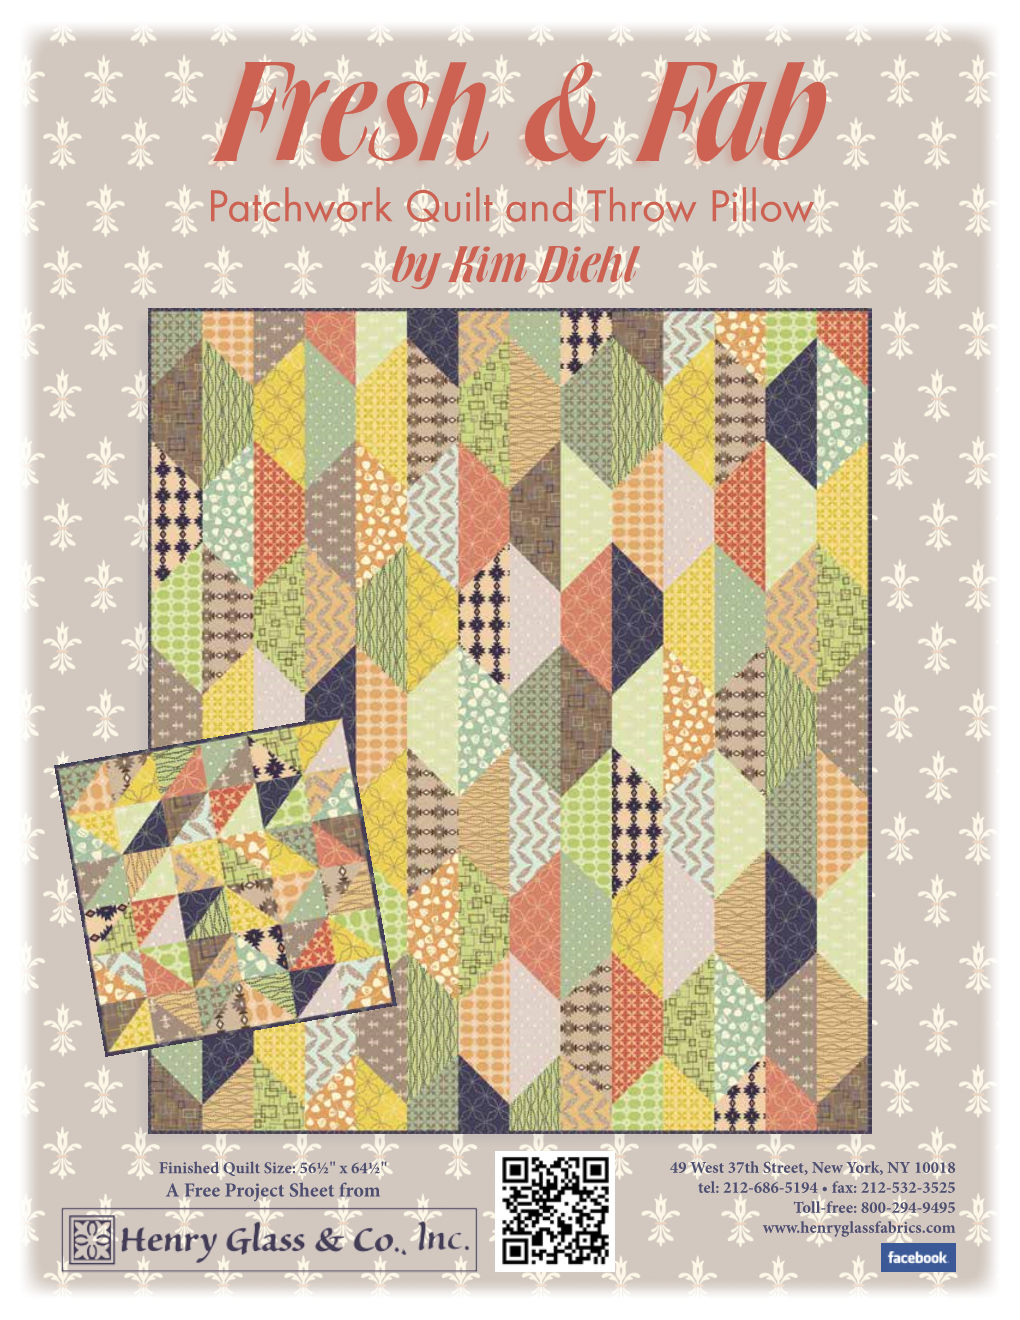 Patchwork Quilt and Throw Pillow by Kim Diehl